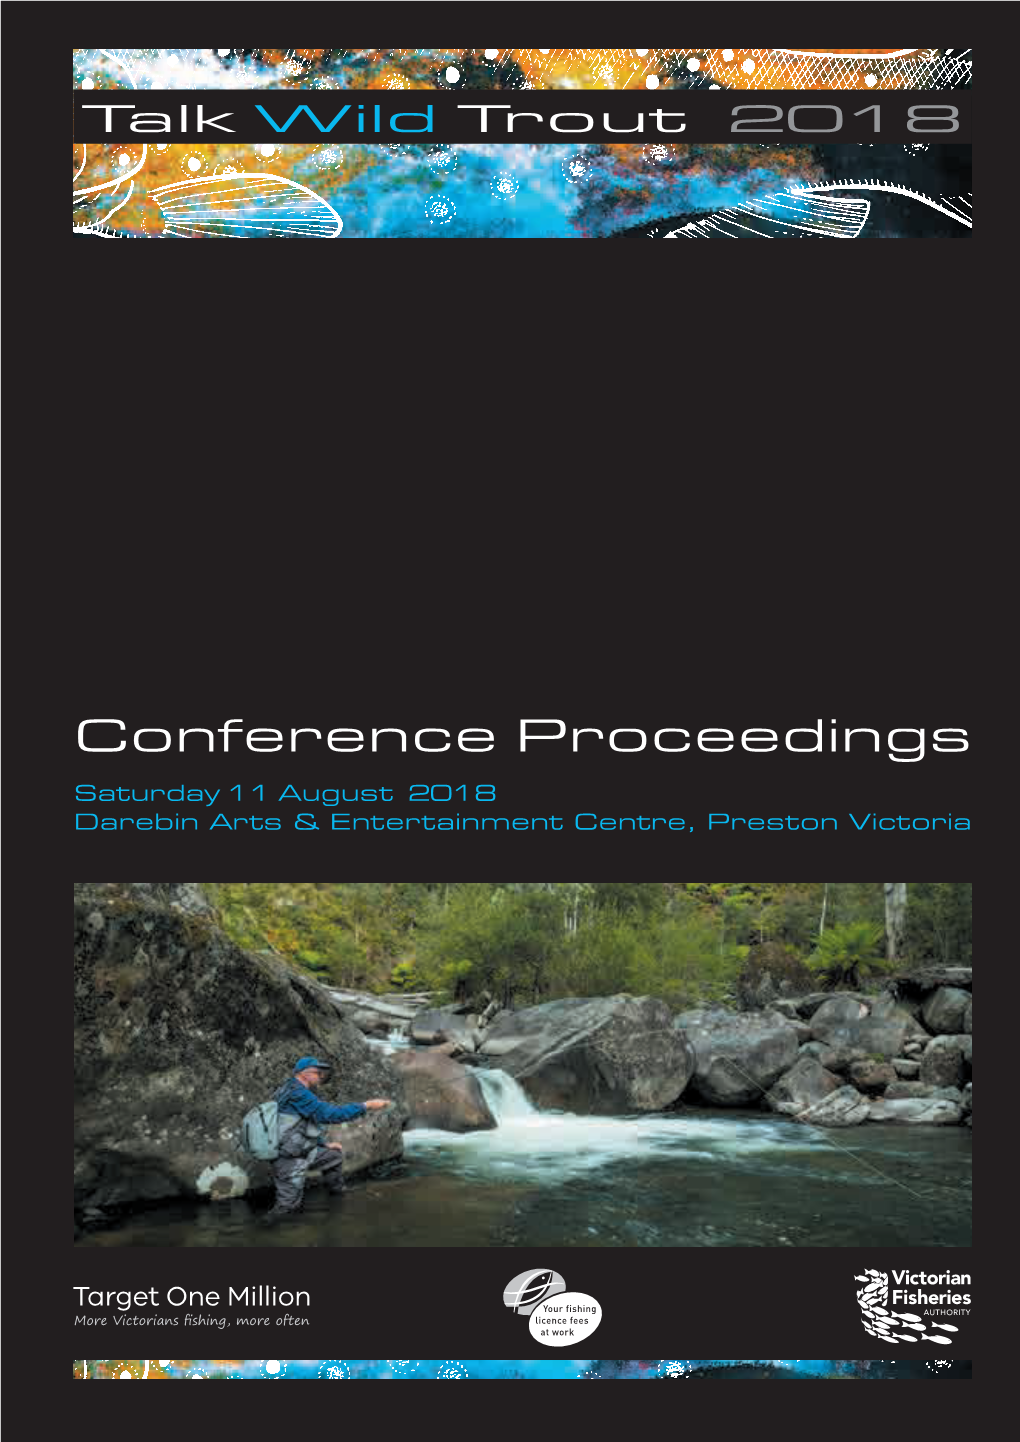 Talk Wild Trout Conference Proceedings 2018